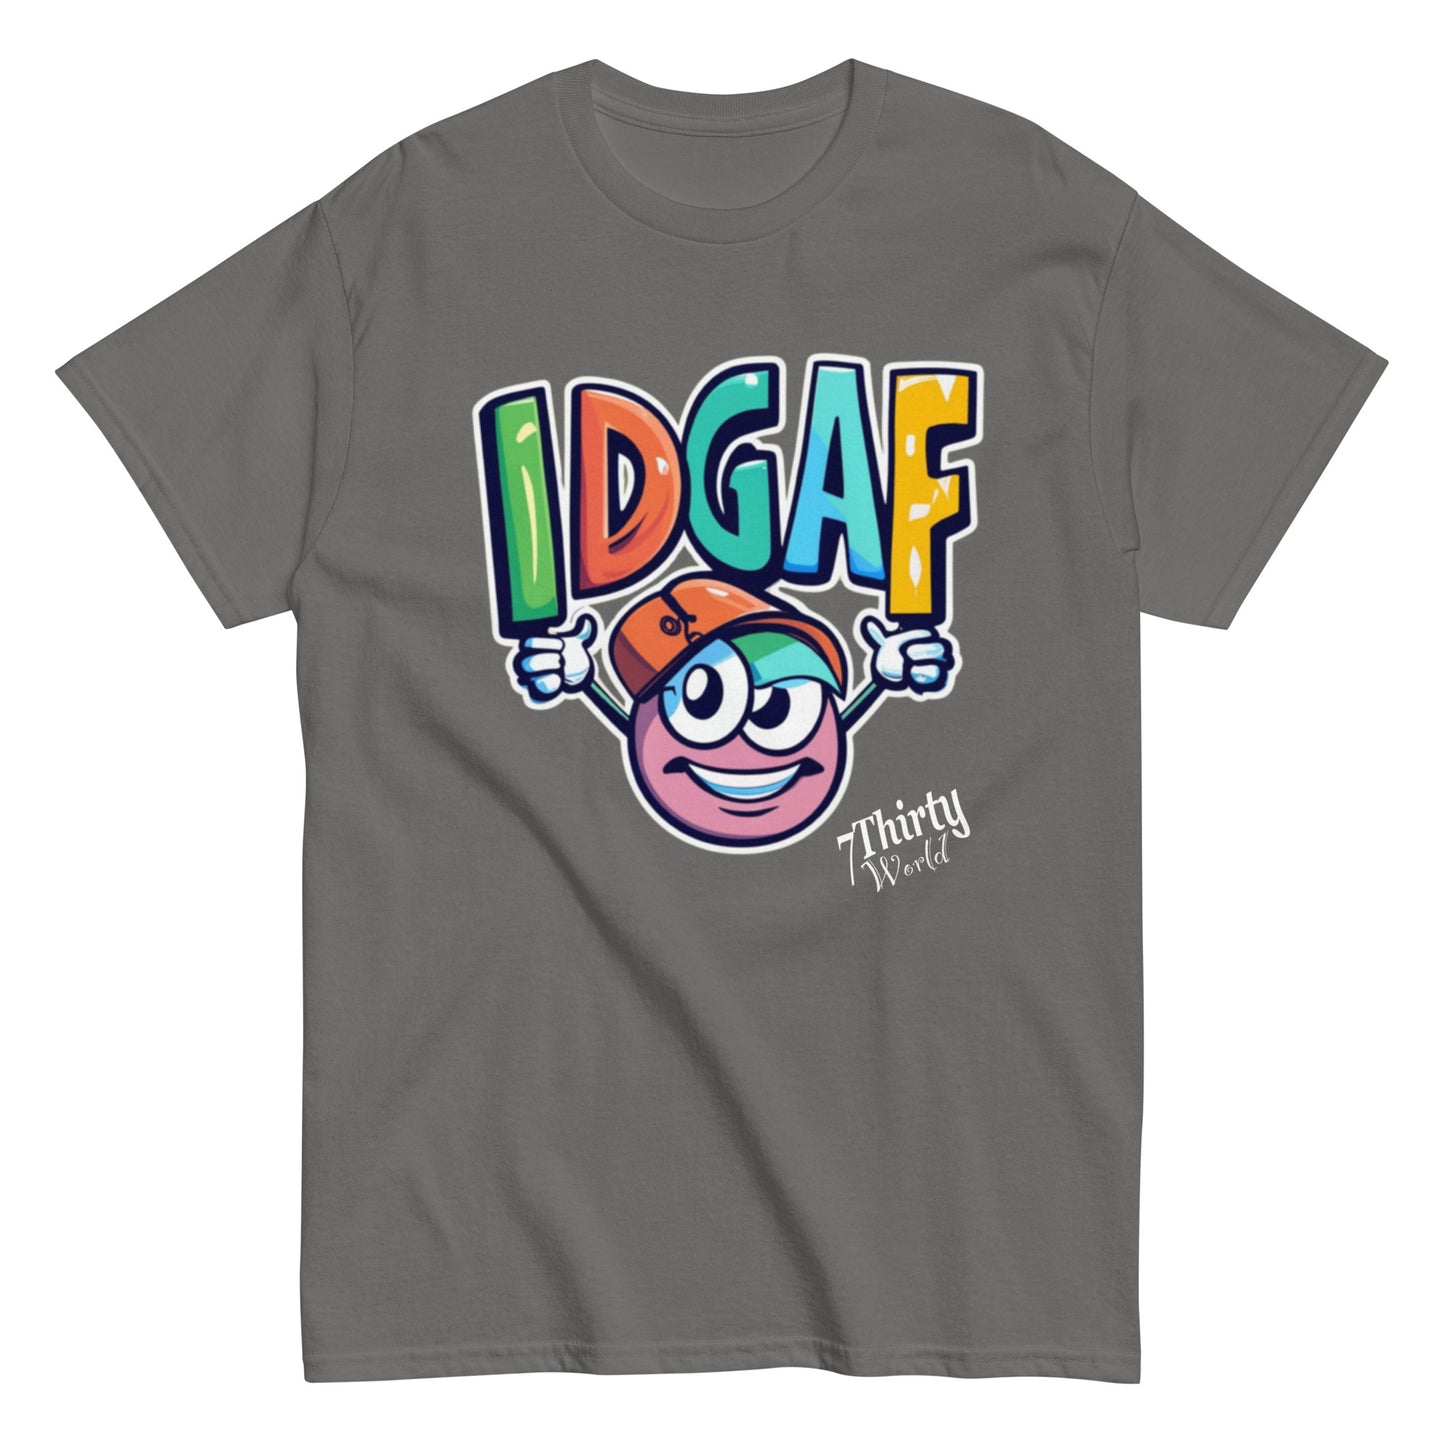 7ThirtyWorld "IDGAF v1" NFT-Shirt from the "Say It With Ya Chest" Collection